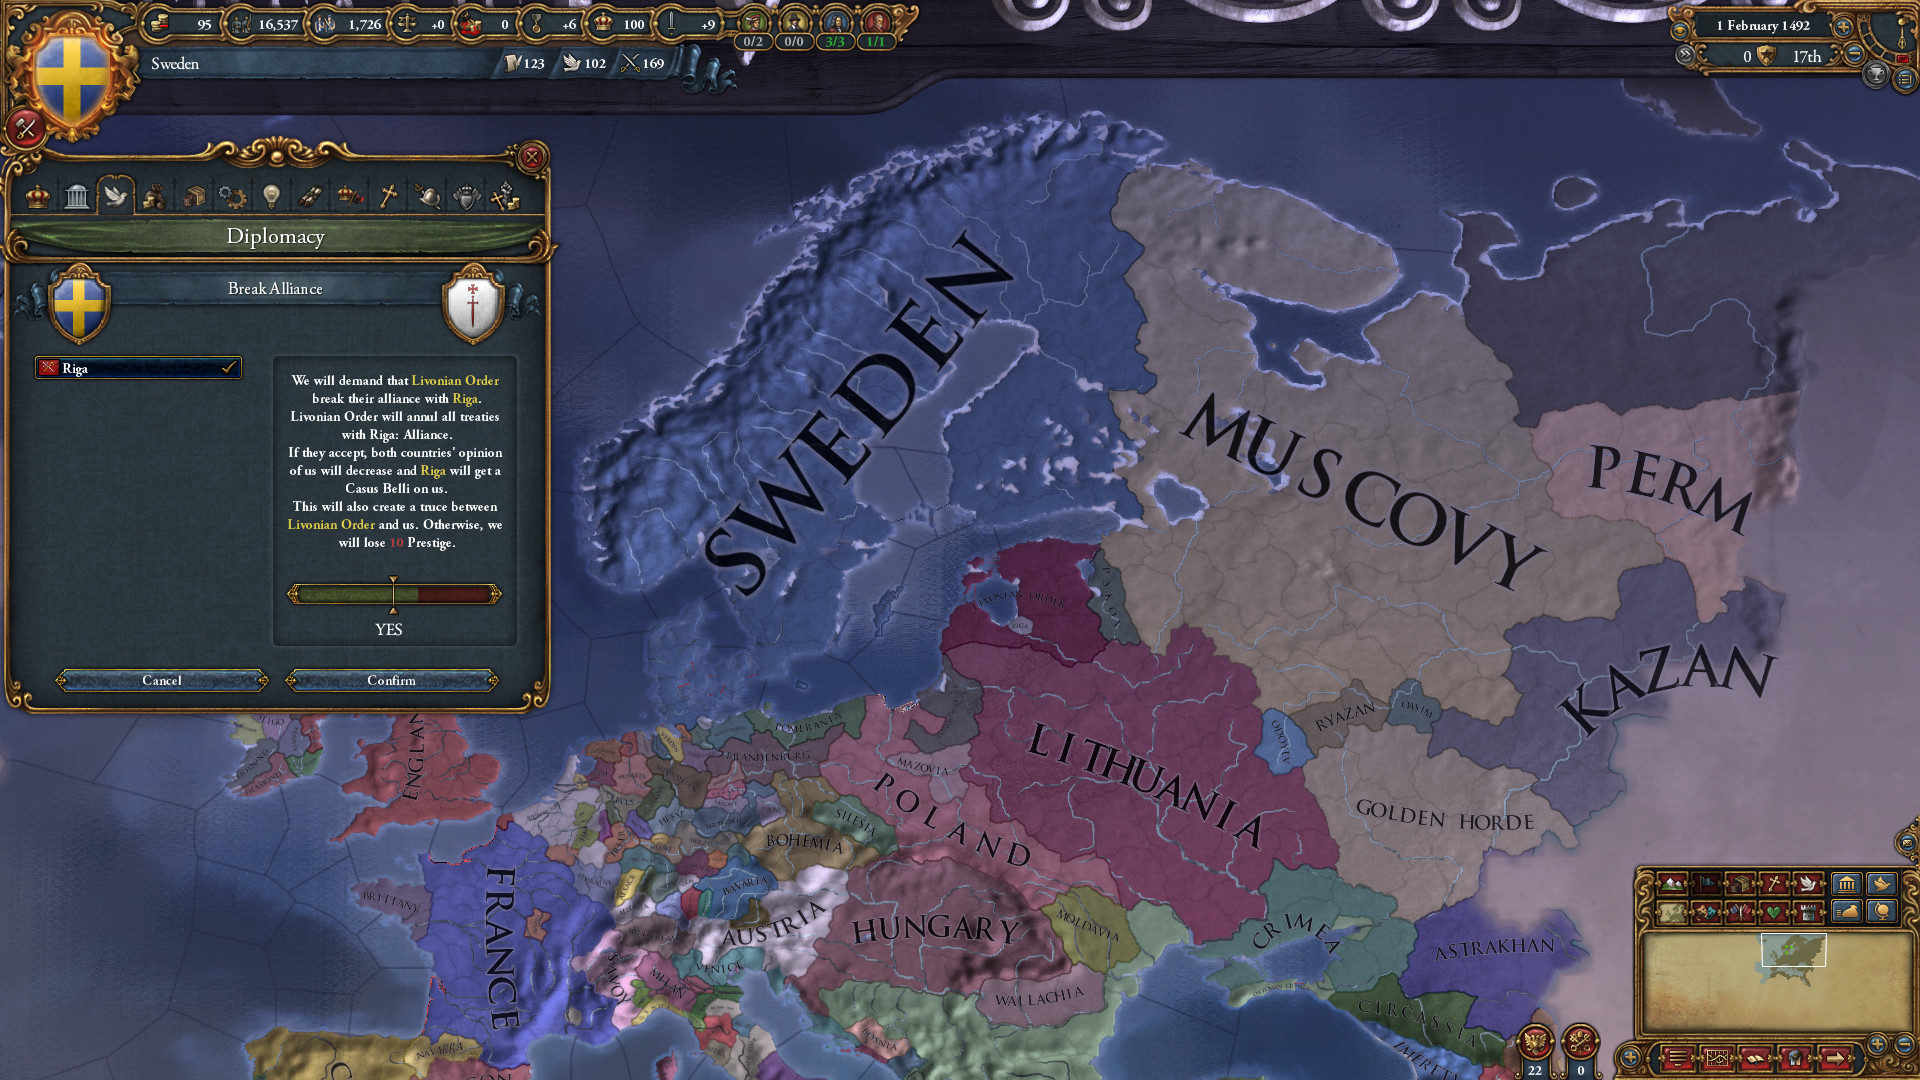 Expansion - Europa Universalis IV: Rights of Man Featured Screenshot #1